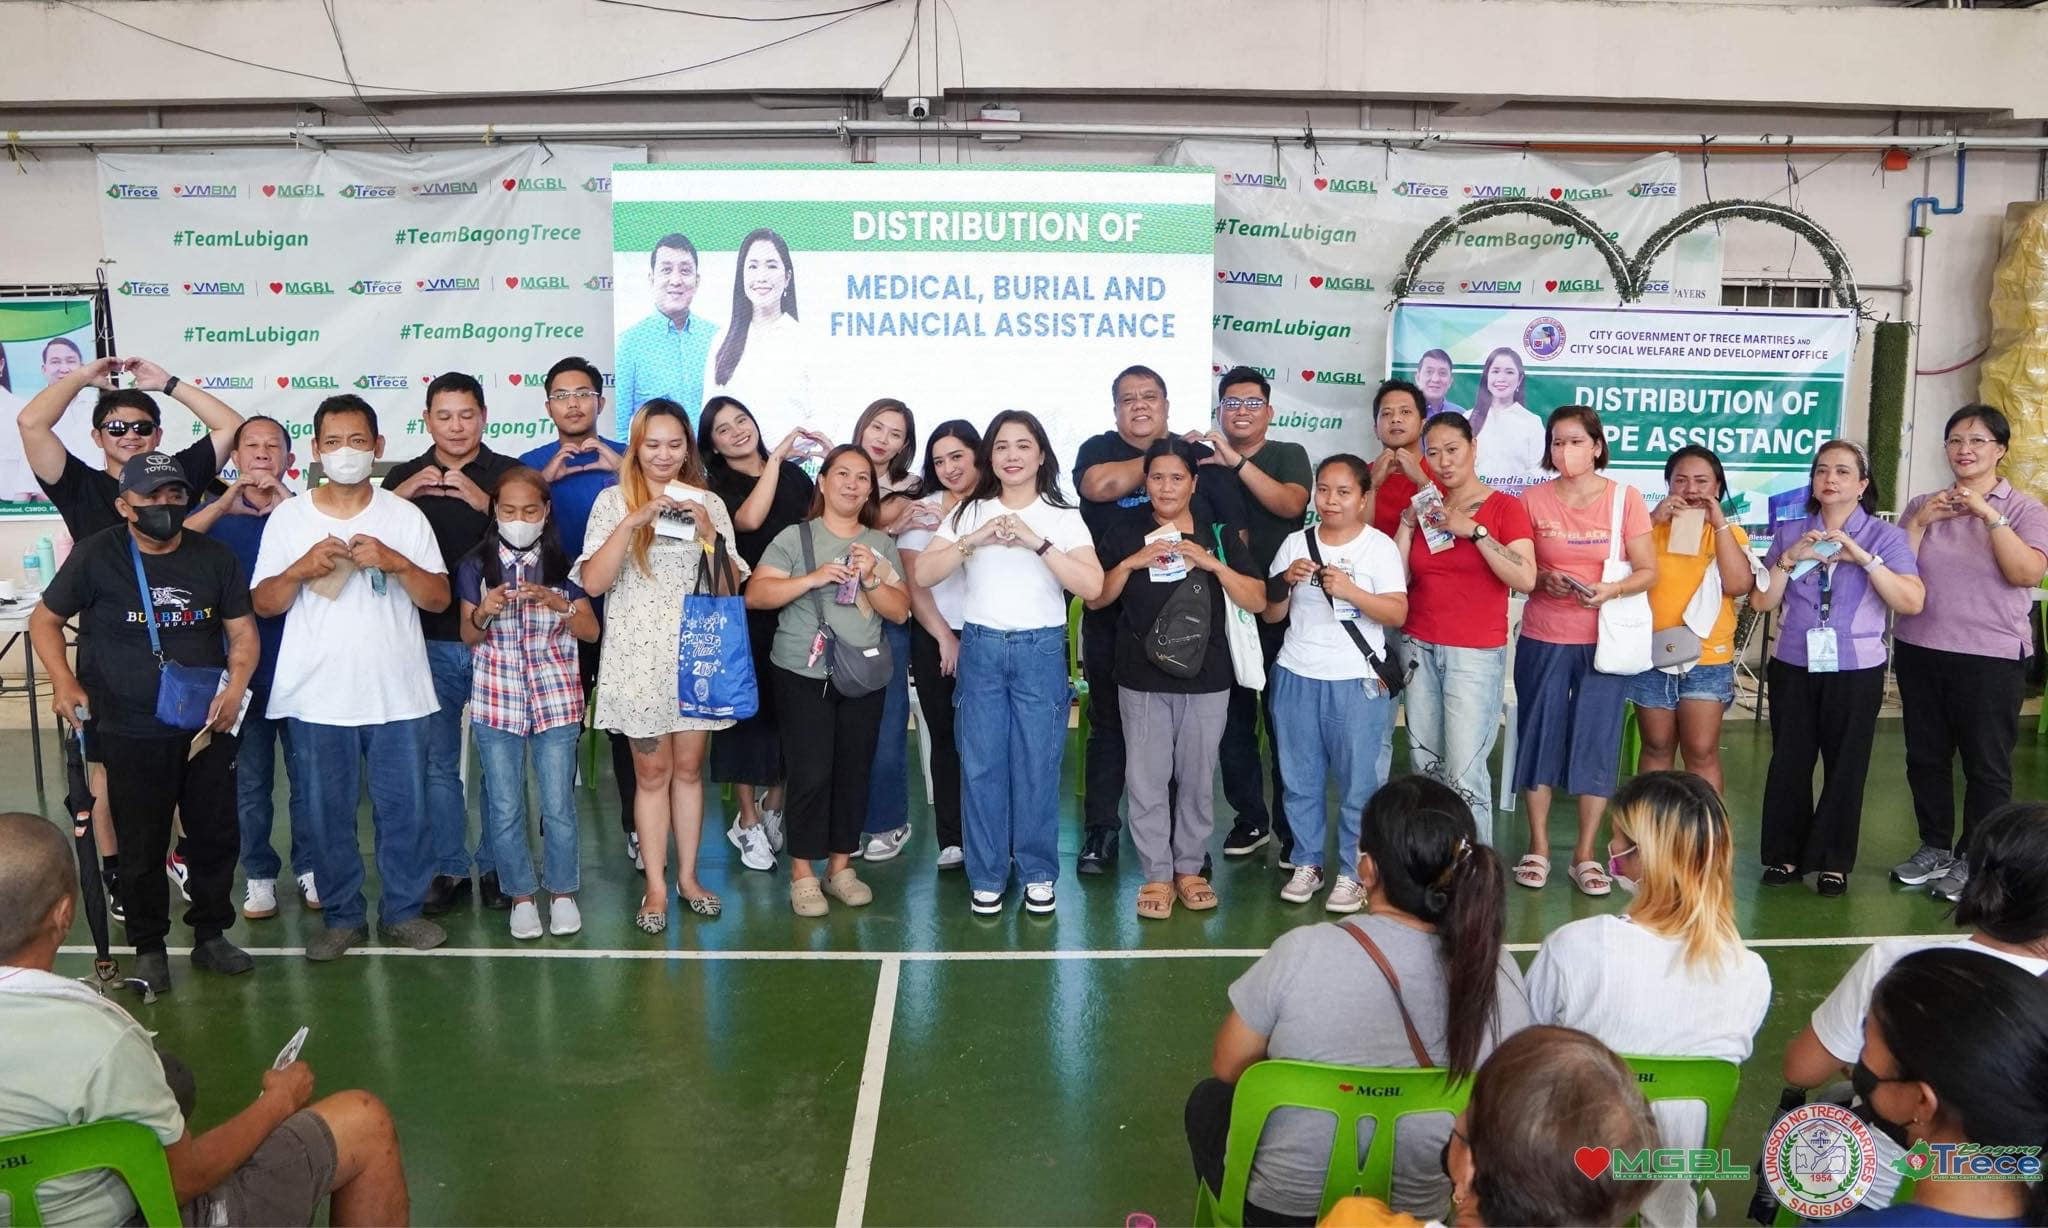 DISTRIBUTION OF HOPE, MEDICAL, BURIAL AND FINANCIAL ASSISTANCE DISTRIBUTION OF ASSISTIVE DEVICE